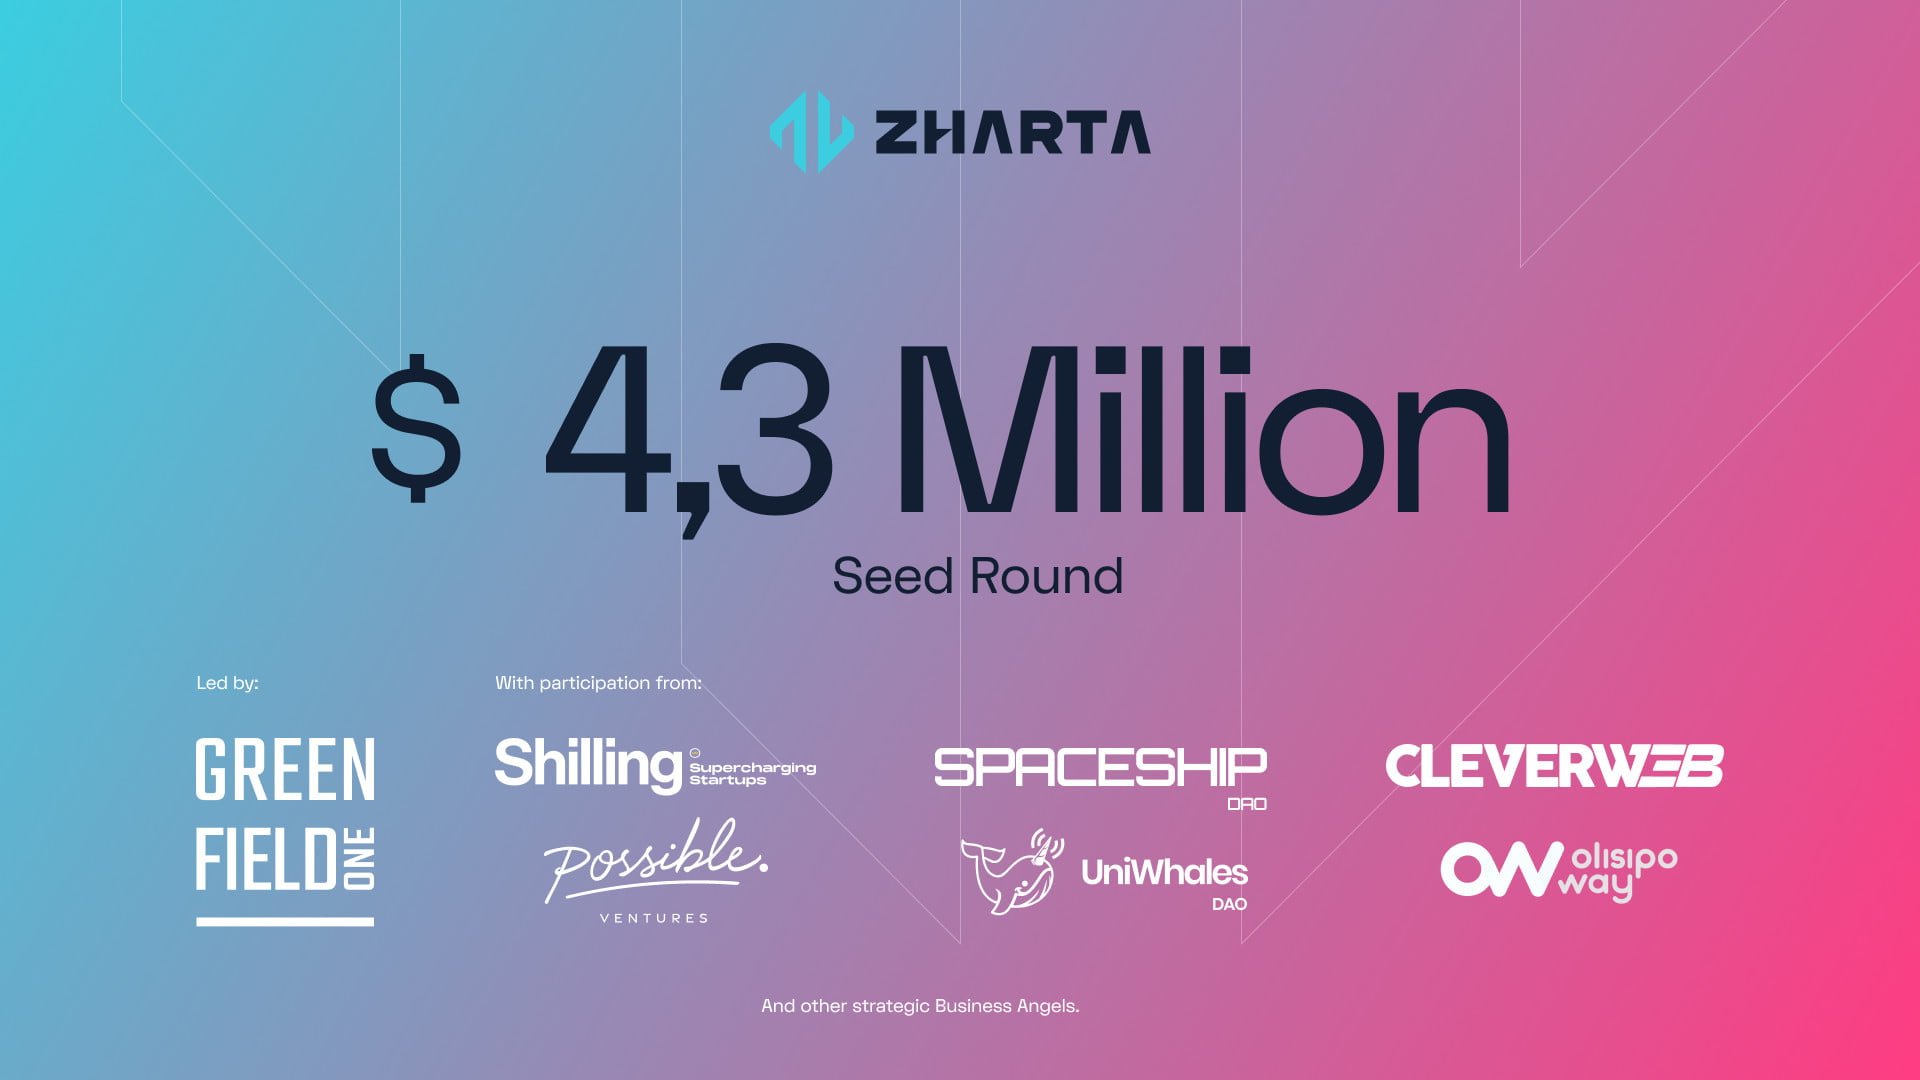 Zharta Raises $4.3 M to Speed Growth in Instant NFT Lending 4